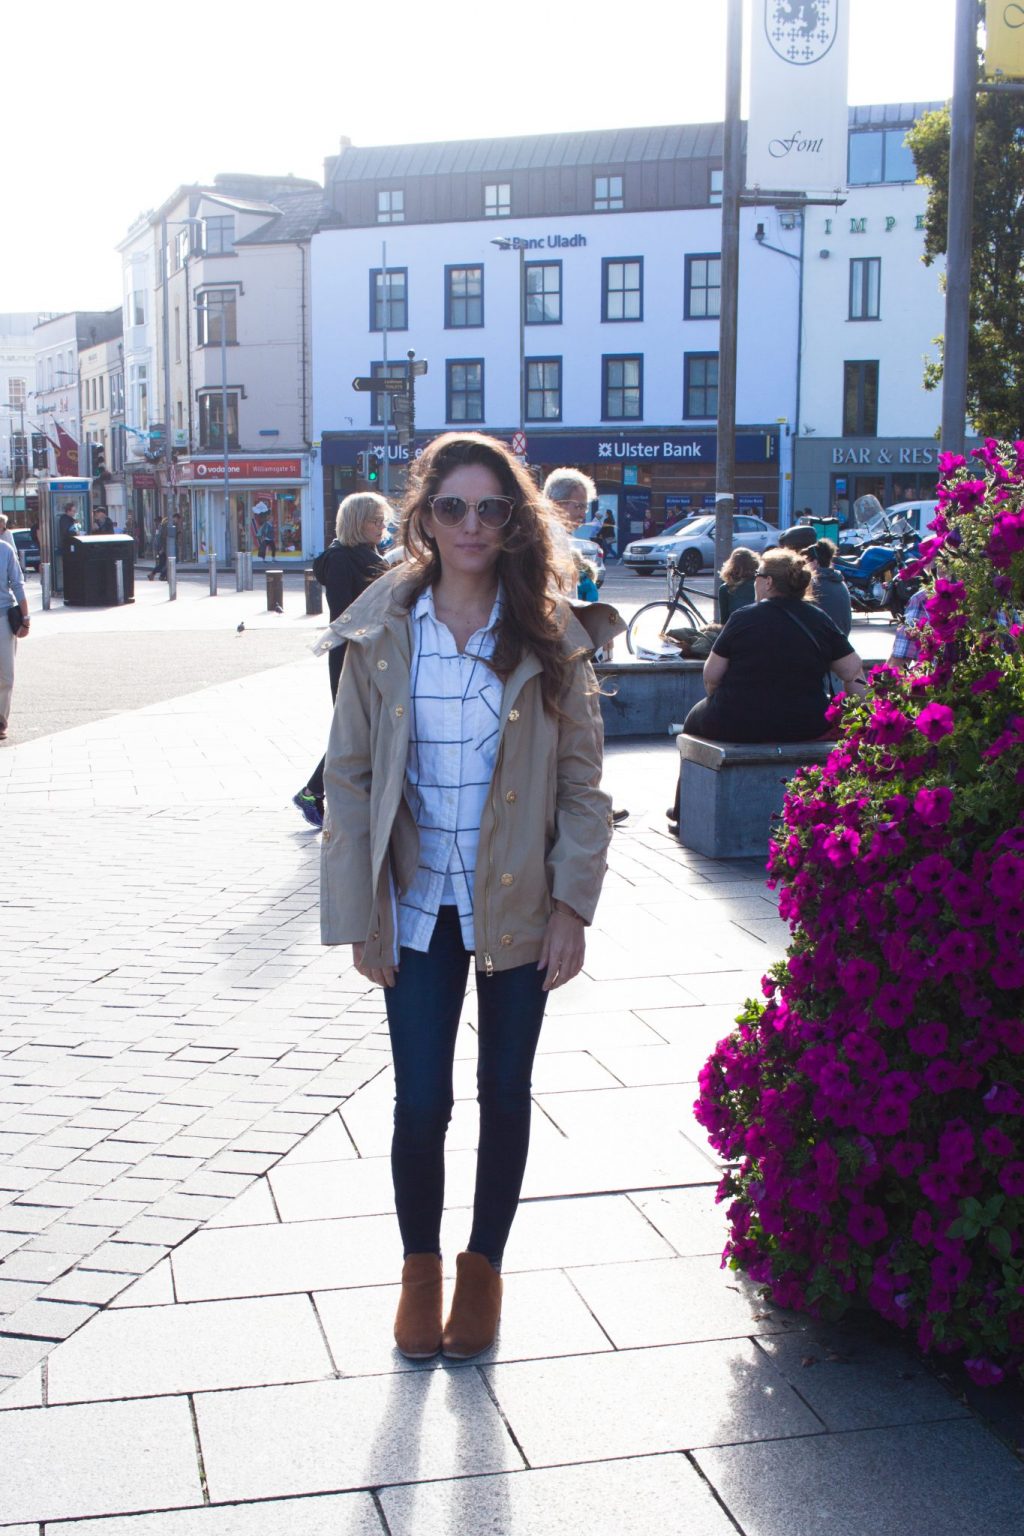 galway, ireland, what to wear in galway, what to do in galway, what to wear in ireland in september, windowpane flannel button down, trench coat, stylish fall outfit ideas, classic fall outfits, clean fall outfits